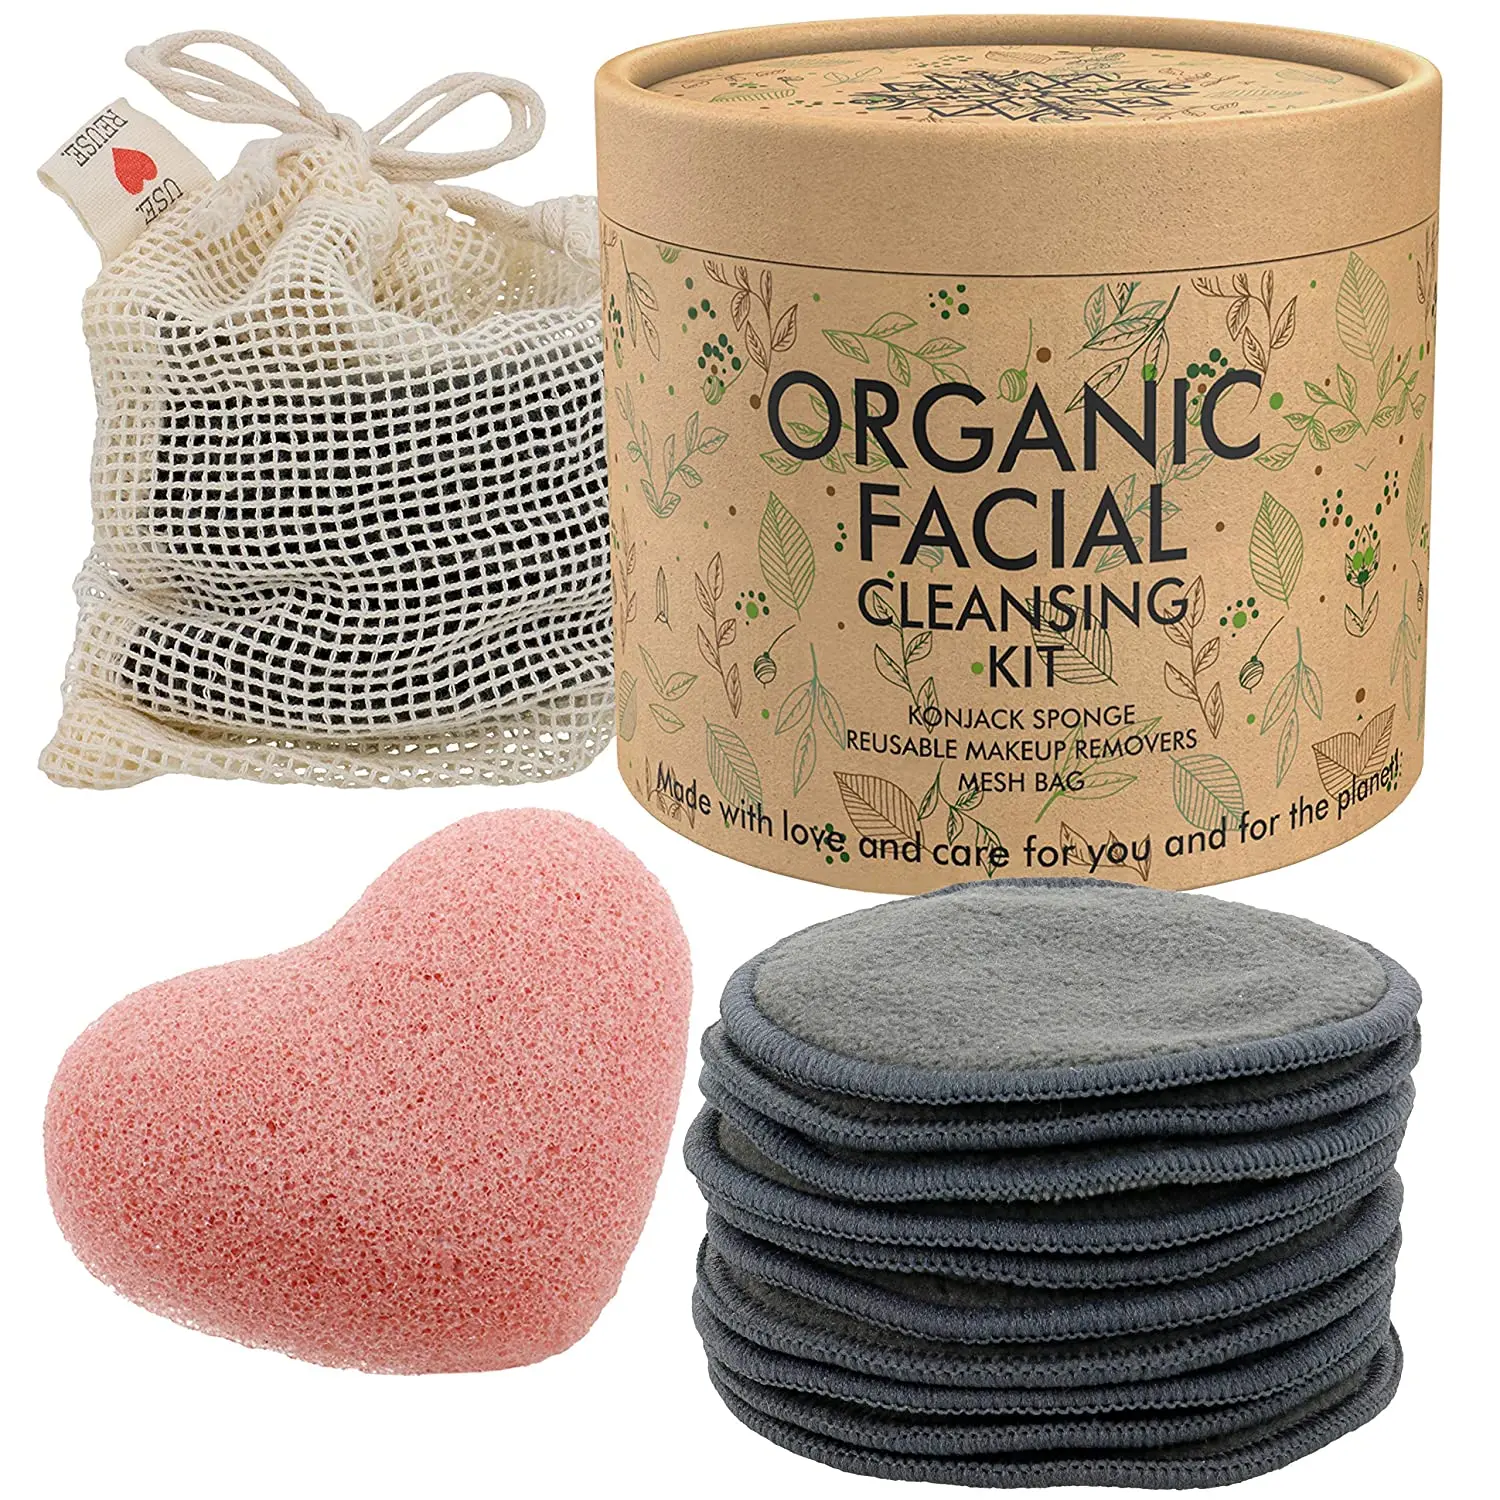 

Eco Custom 2 3 4 Layer Make Up Set Instruction Note 20 Reusable Remover Bamboo Cotton Pads